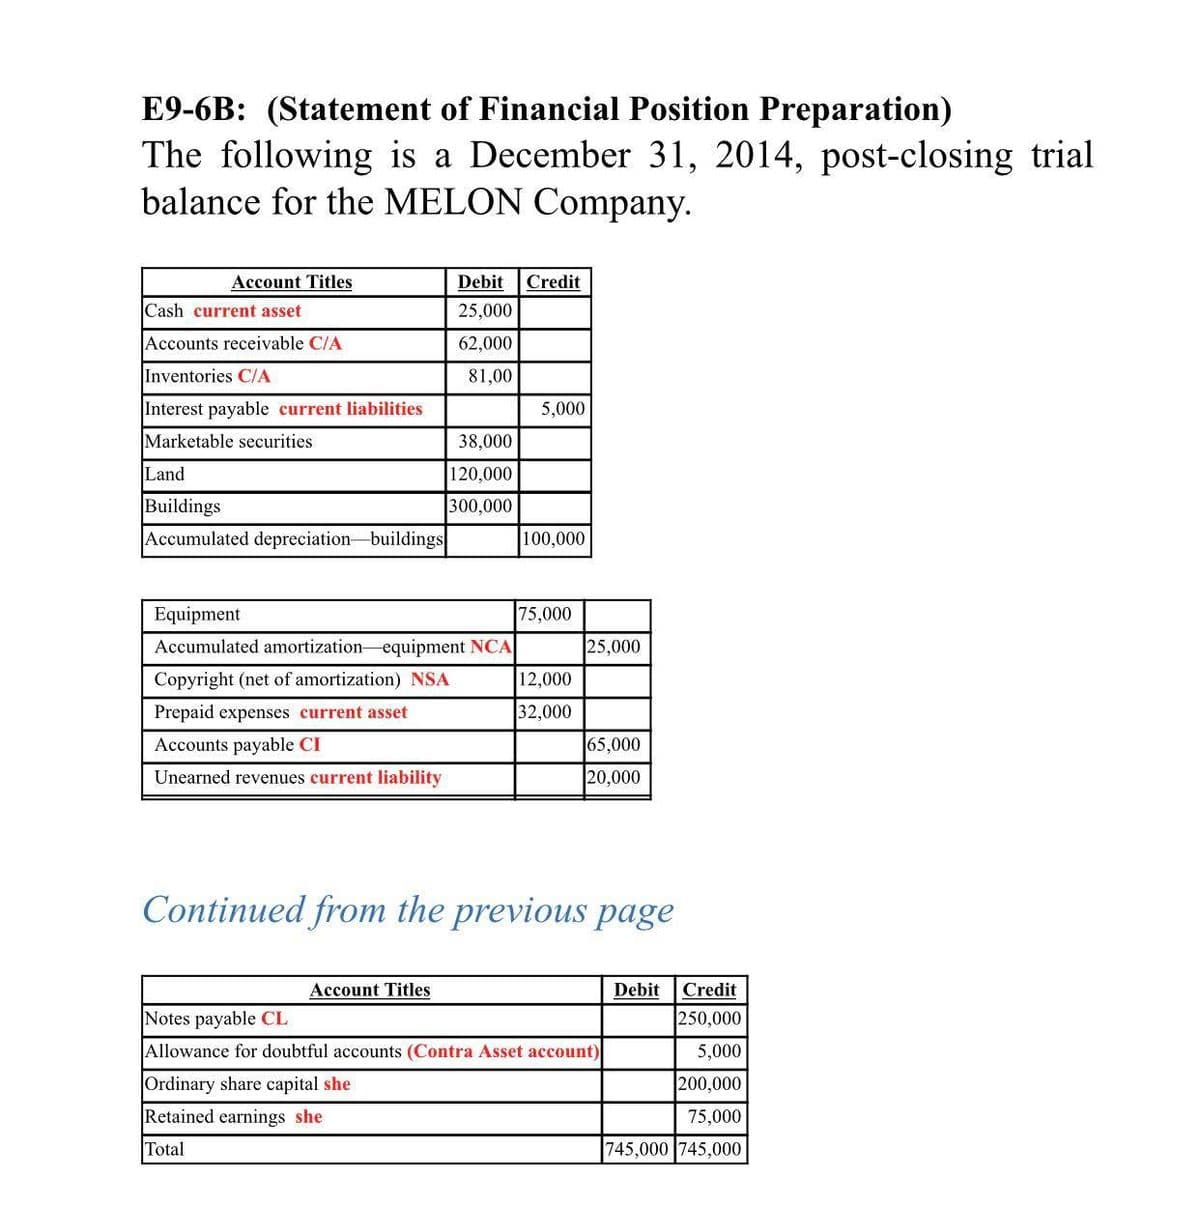 E9-6B: (Statement of Financial Position Preparation)
The following is a December 31, 2014, post-closing trial
balance for the MELON Company.
Account Titles
Debit
Credit
Cash current asset
25,000
Accounts receivable C/A
62,000
Inventories C/A
81,00
Interest payable current liabilities
5,000
Marketable securities
38,000
Land
120,000
Buildings
Accumulated depreciation-buildings
300,000
100,000
Equipment
75,000
Accumulated amortization equipment NCA
25,000
Copyright (net of amortization) NSA
12,000
Prepaid expenses current asset
32,000
Accounts payable CI
65,000
Unearned revenues current liability
20,000
Continued from the previous page
Account Titles
Debit
Credit
Notes payable CL
250,000
Allowance for doubtful accounts (Contra Asset account)
5,000
Ordinary share capital she
Retained earnings she
200,000
75,000
Total
745,000 745,000
